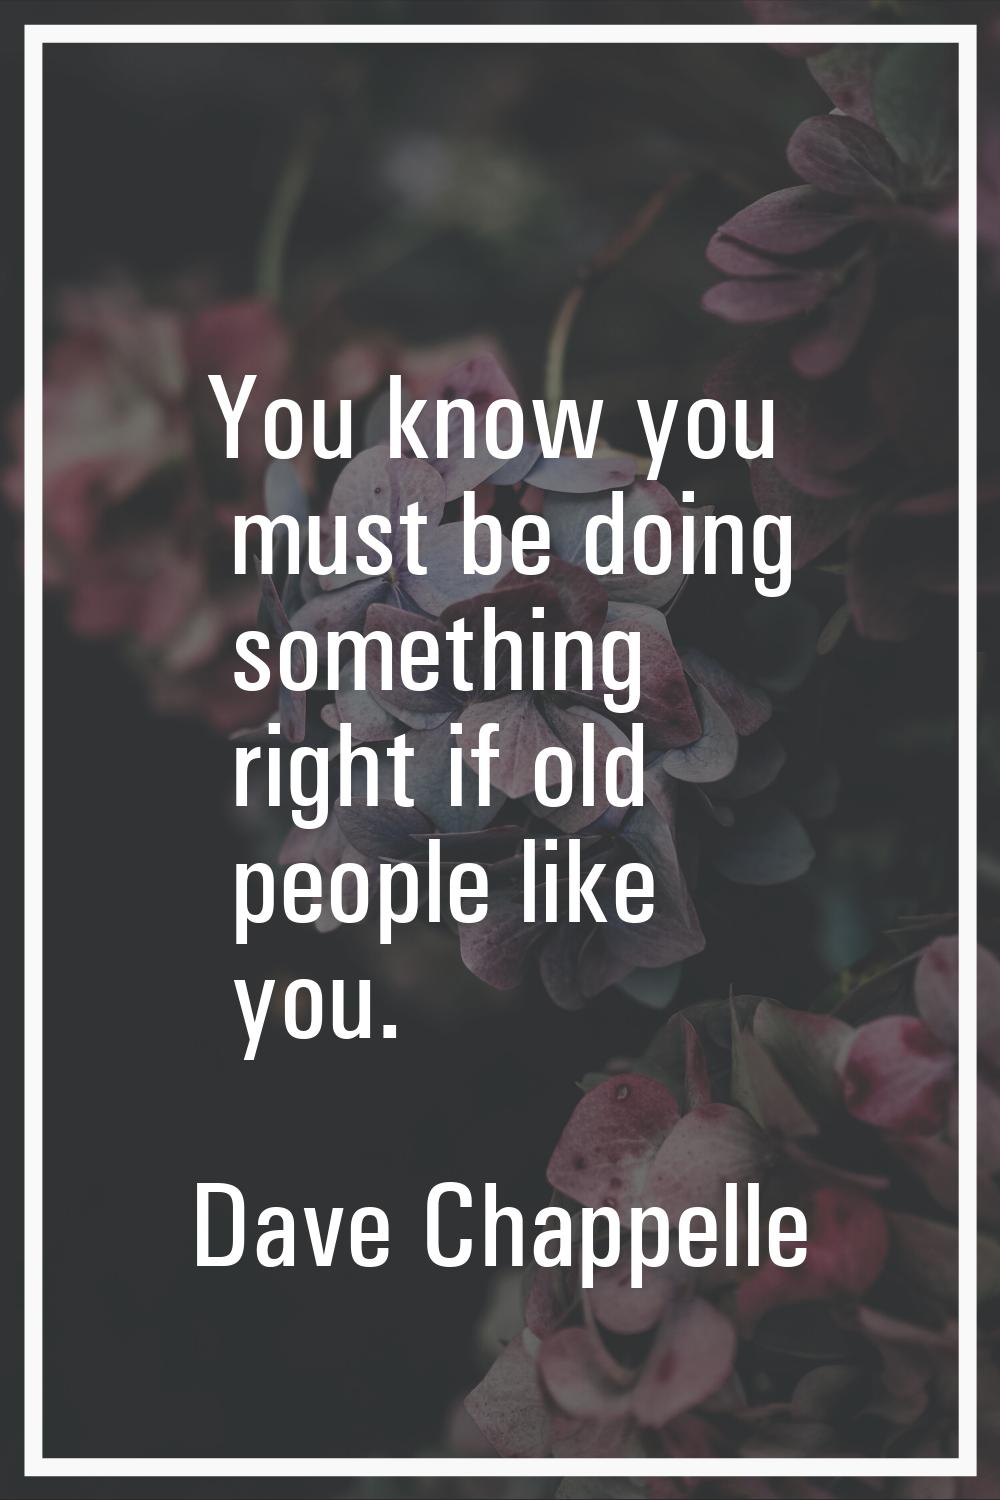 You know you must be doing something right if old people like you.